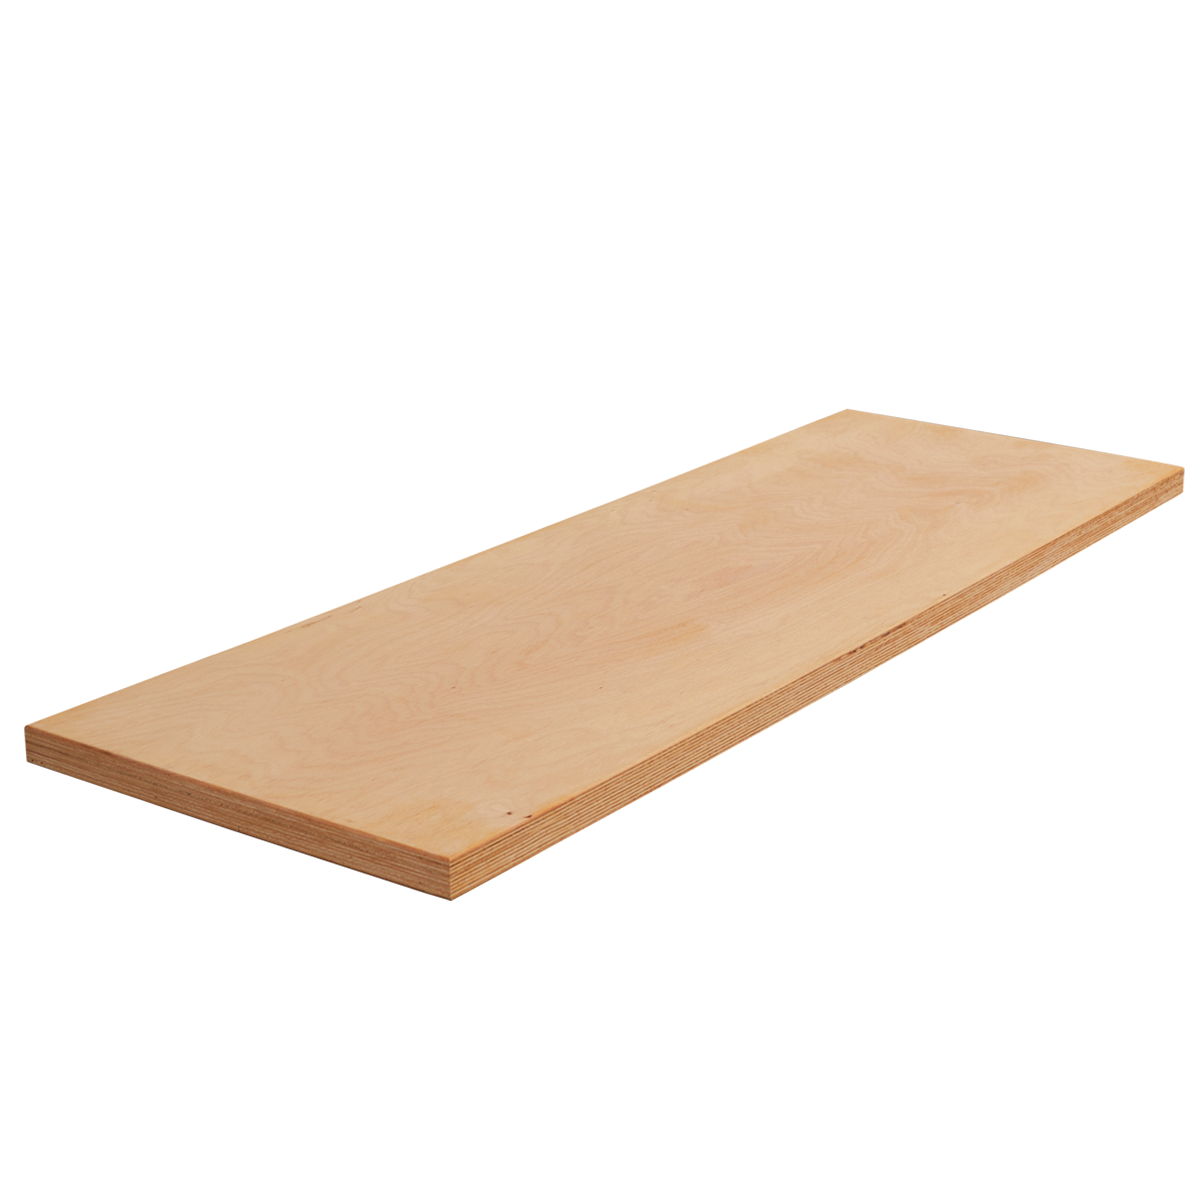 Beech plywood bench top for 2 units -  length 136cm